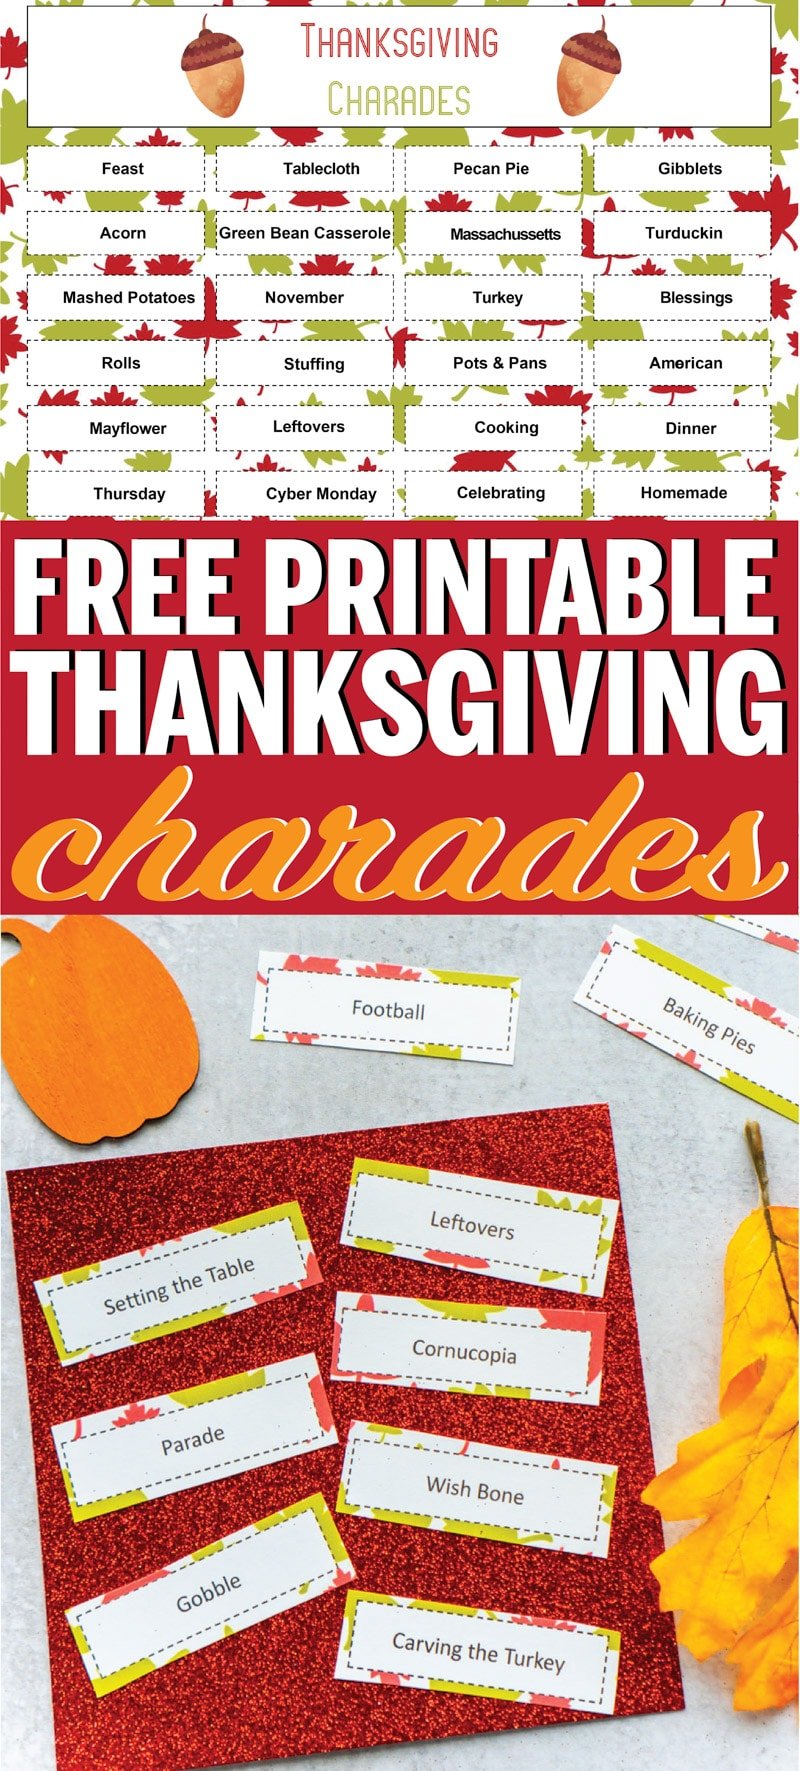 Tons of free printable Thanksgiving charades words! Perfect for kids or adults and one of the best Thanksgiving games ever!